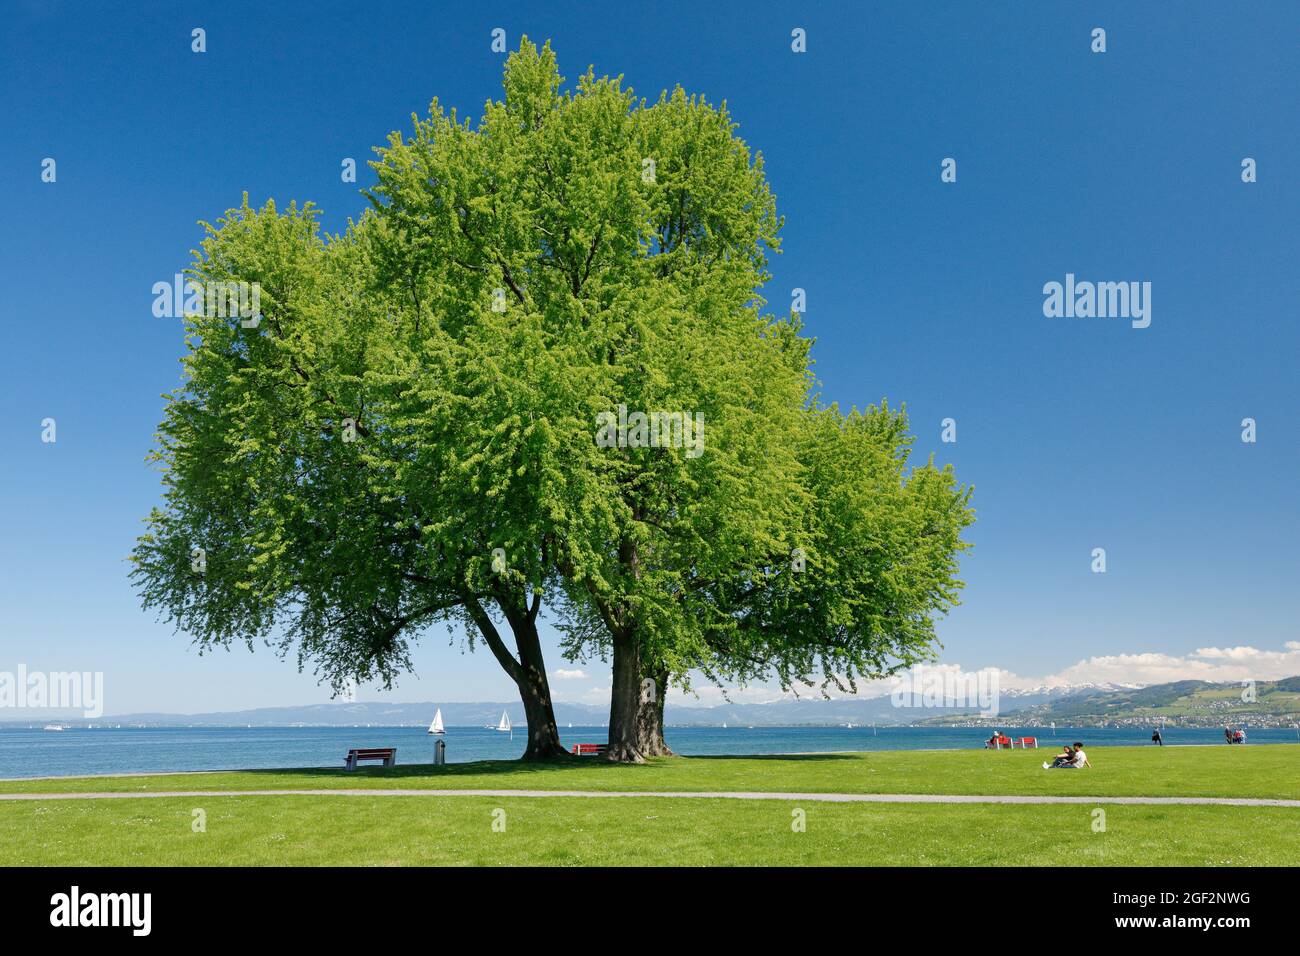 silver maple, white maple, bird's eye maple (Acer saccharinum), Large single silver maple and lawn on shore of Lake Constance near Arbon, Thurgau, Stock Photo